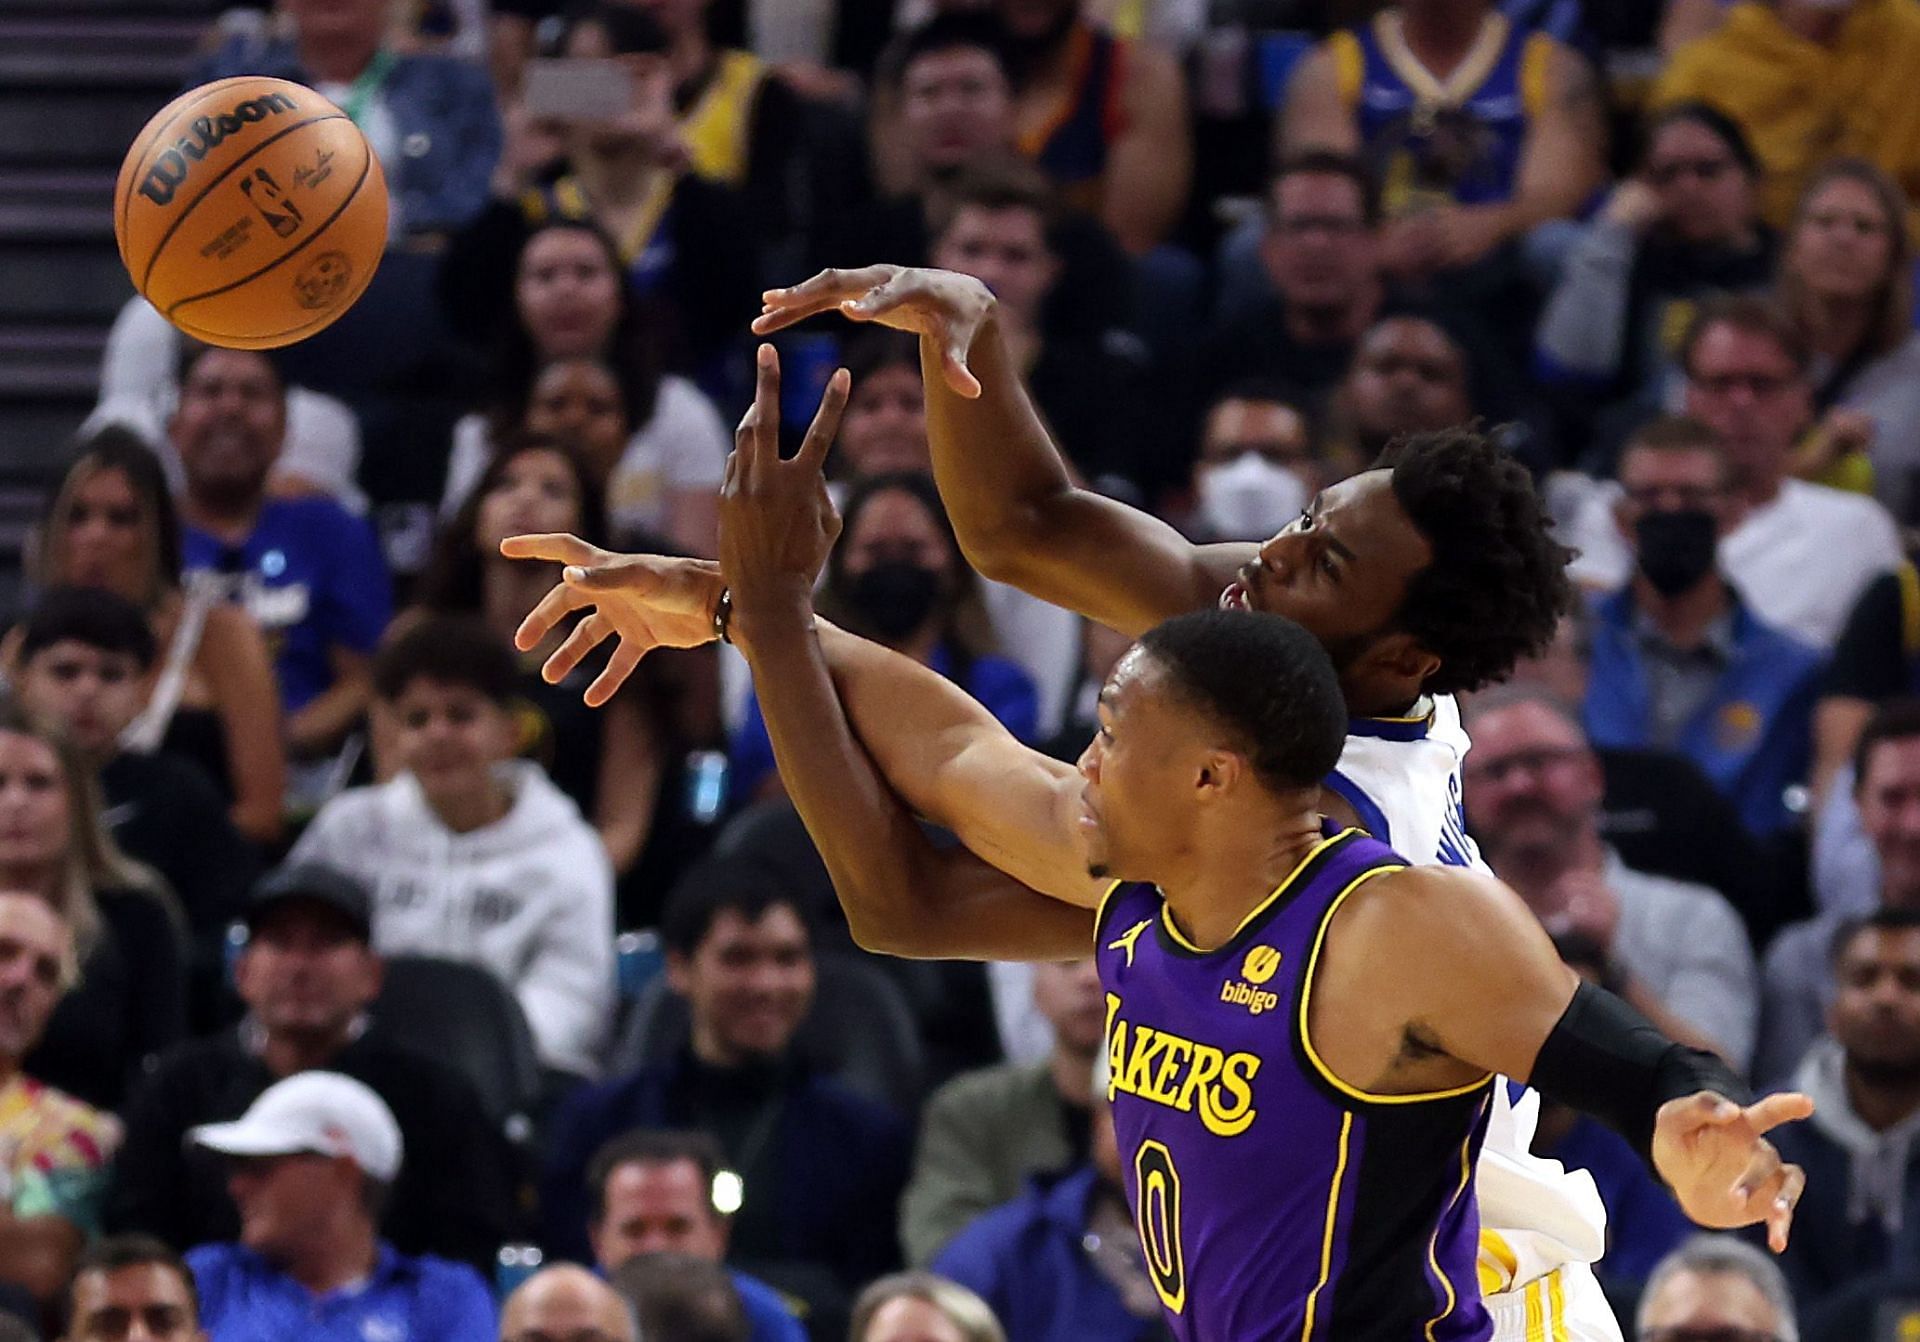 LA Lakers guard Russell Westbrook fighting for a loose ball